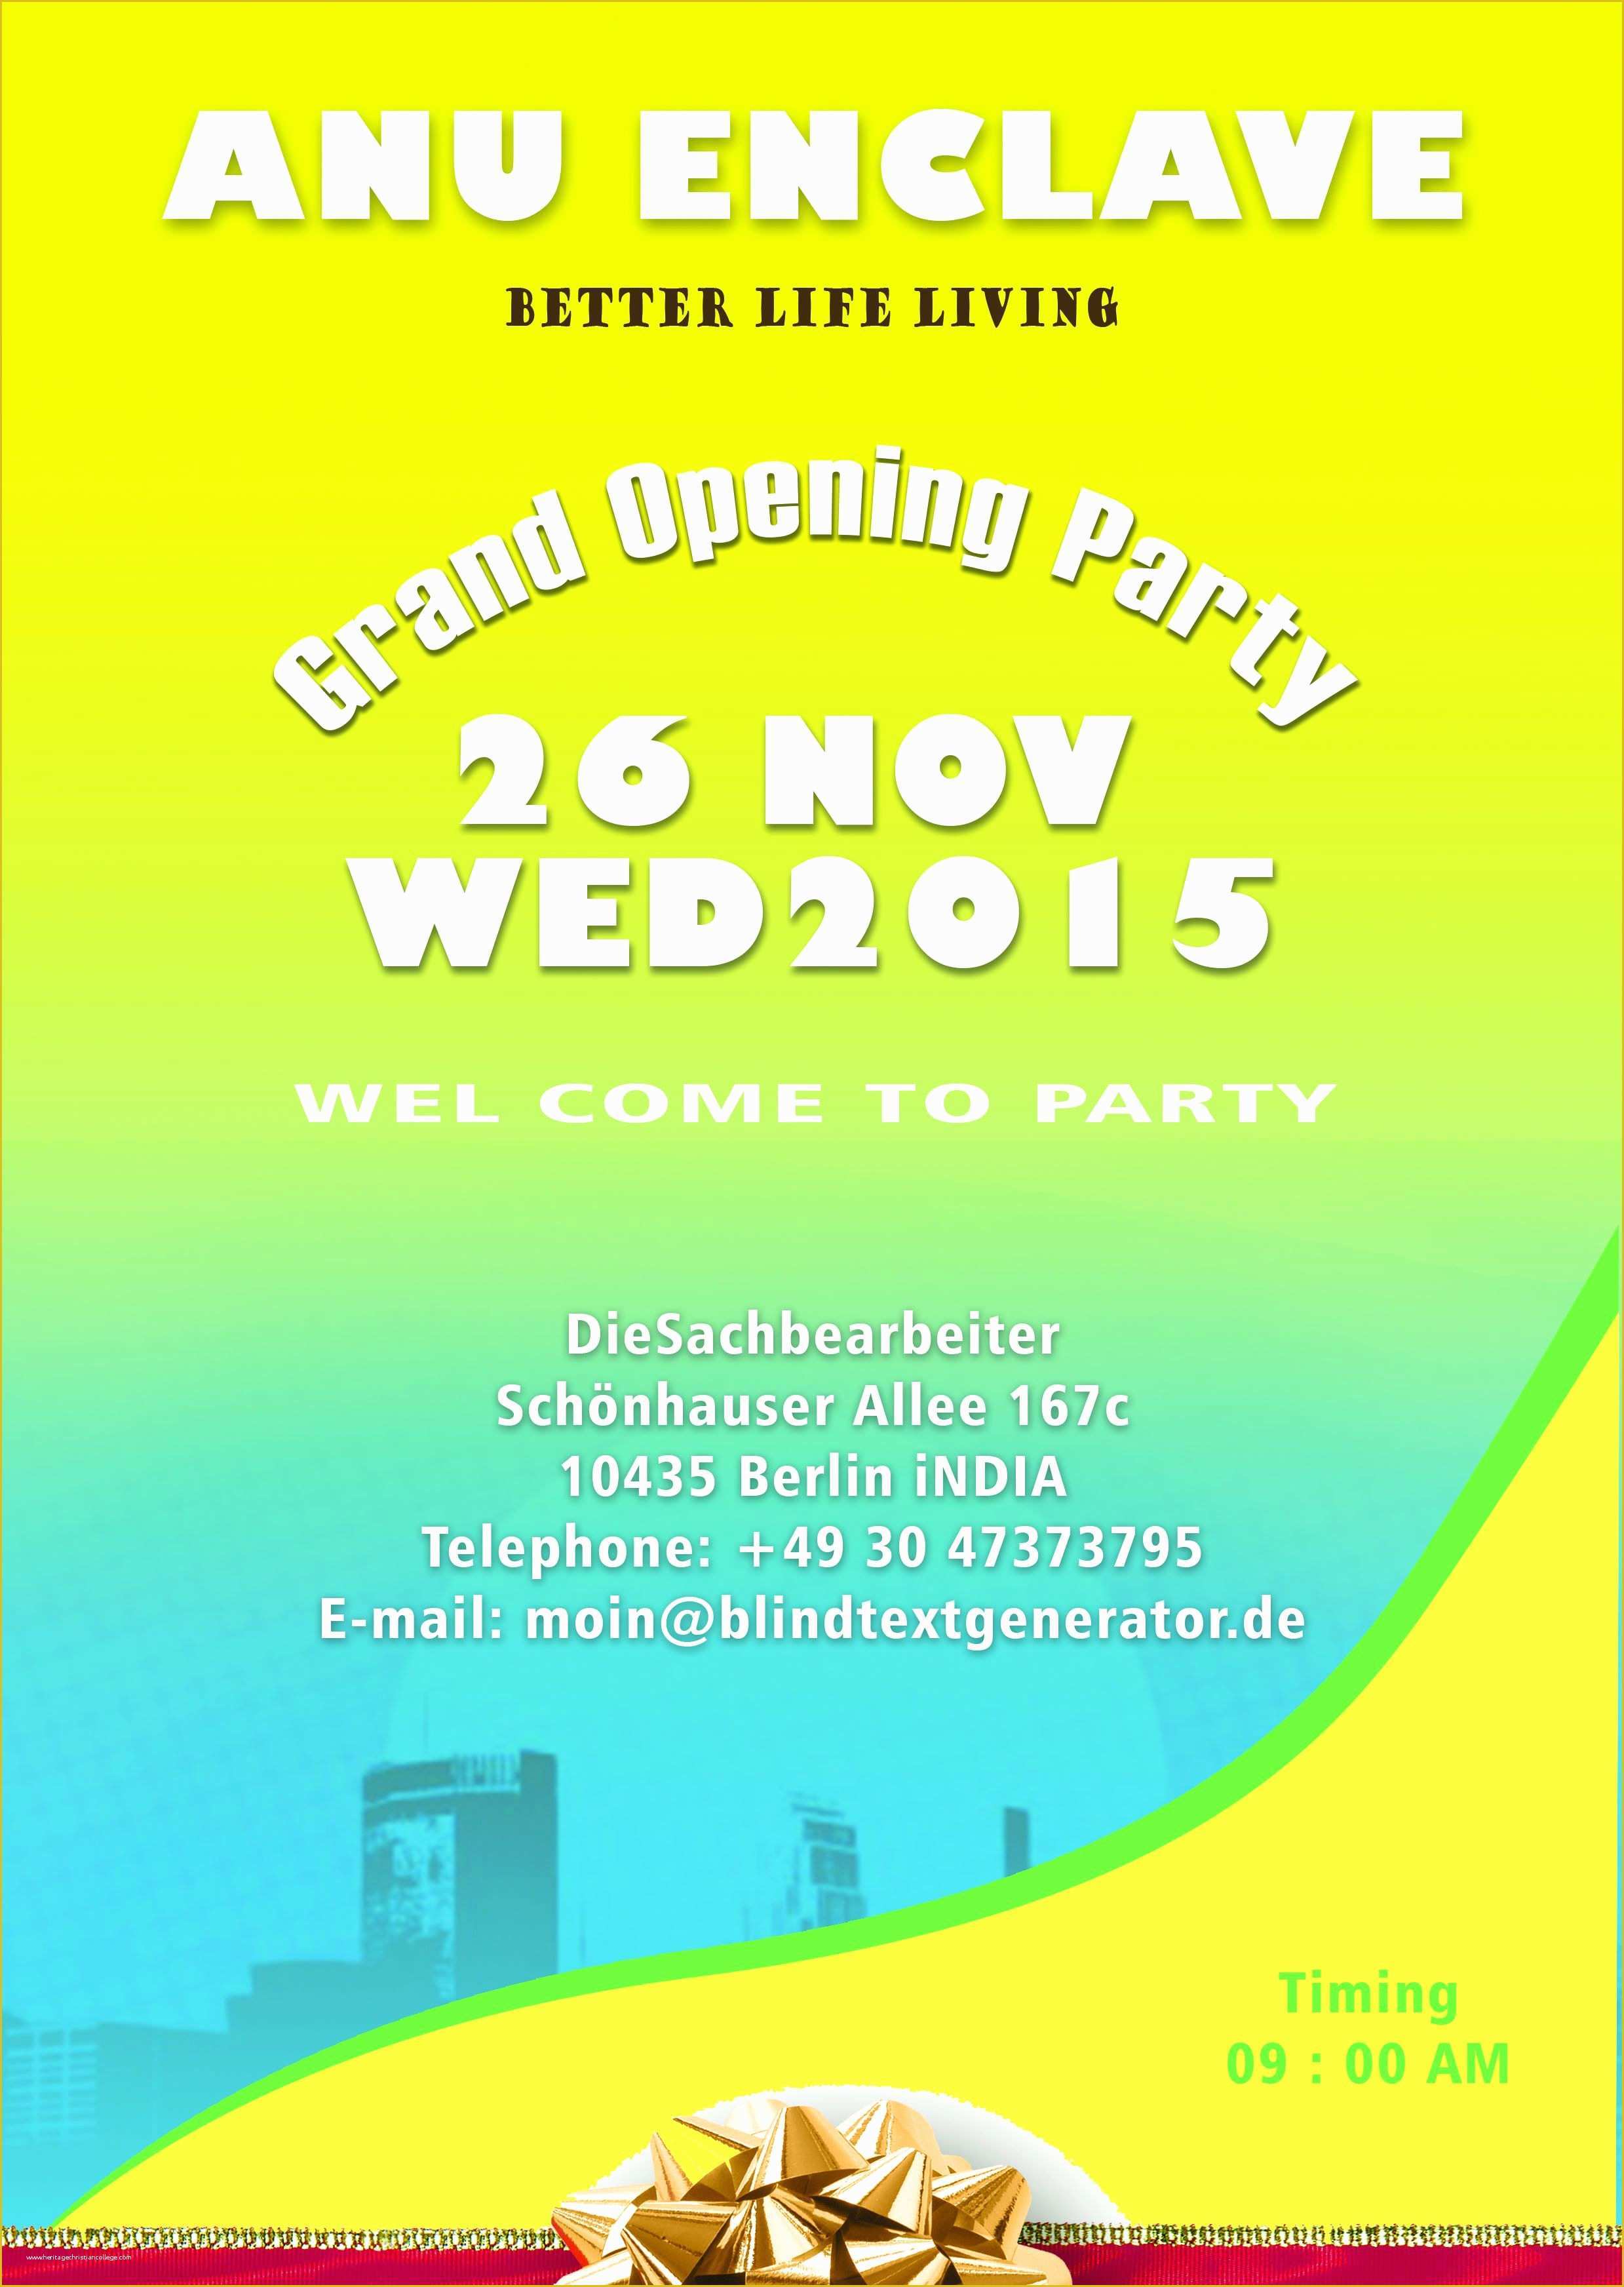 Grand Opening Flyer Template Free Of 20 Grand Opening Flyer Templates Free Demplates